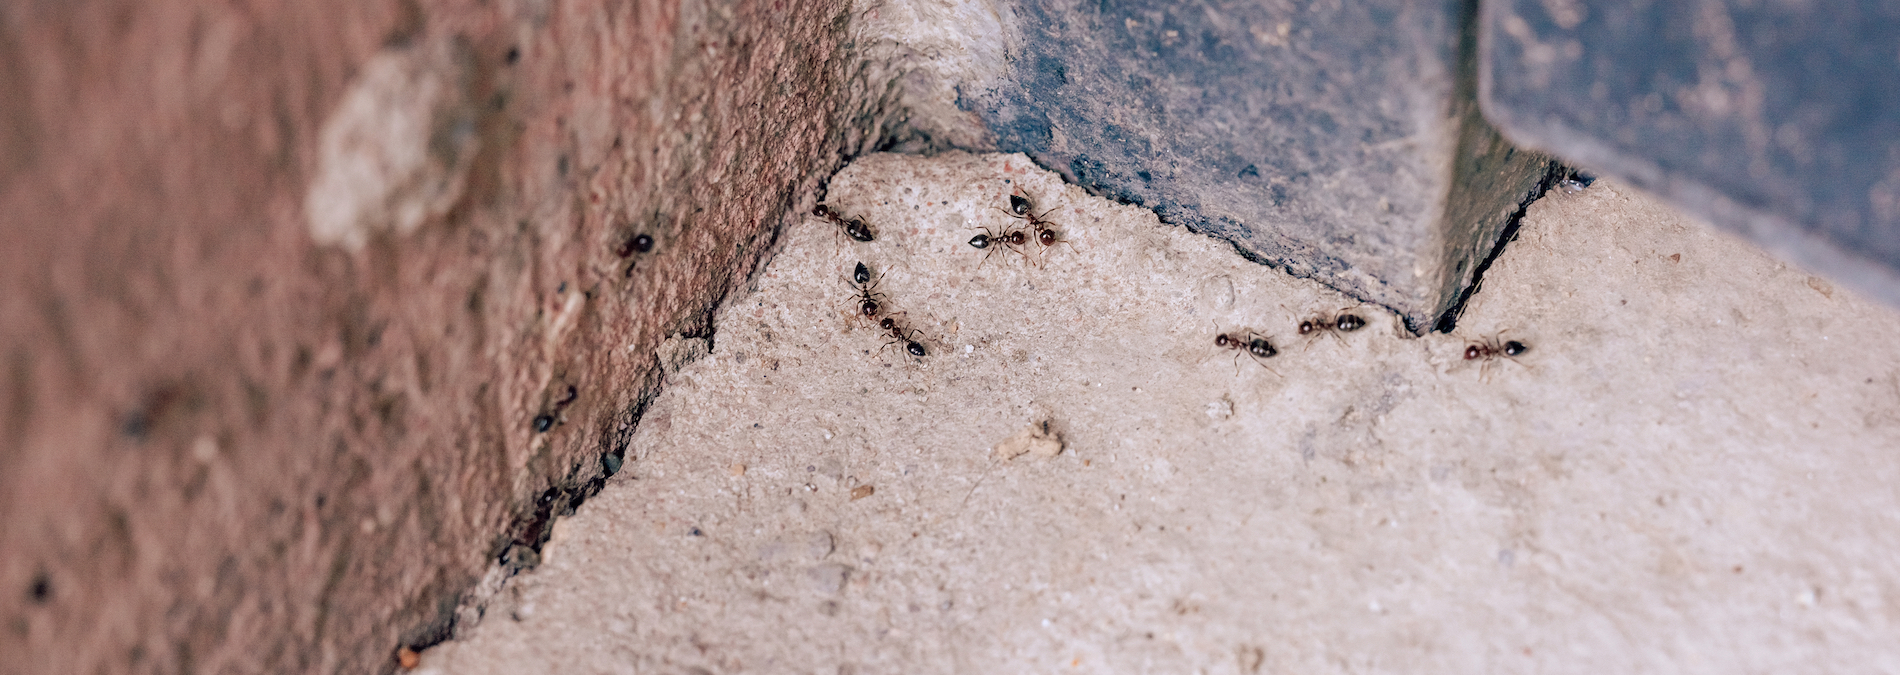 7 ways to get rid of black ants around the house